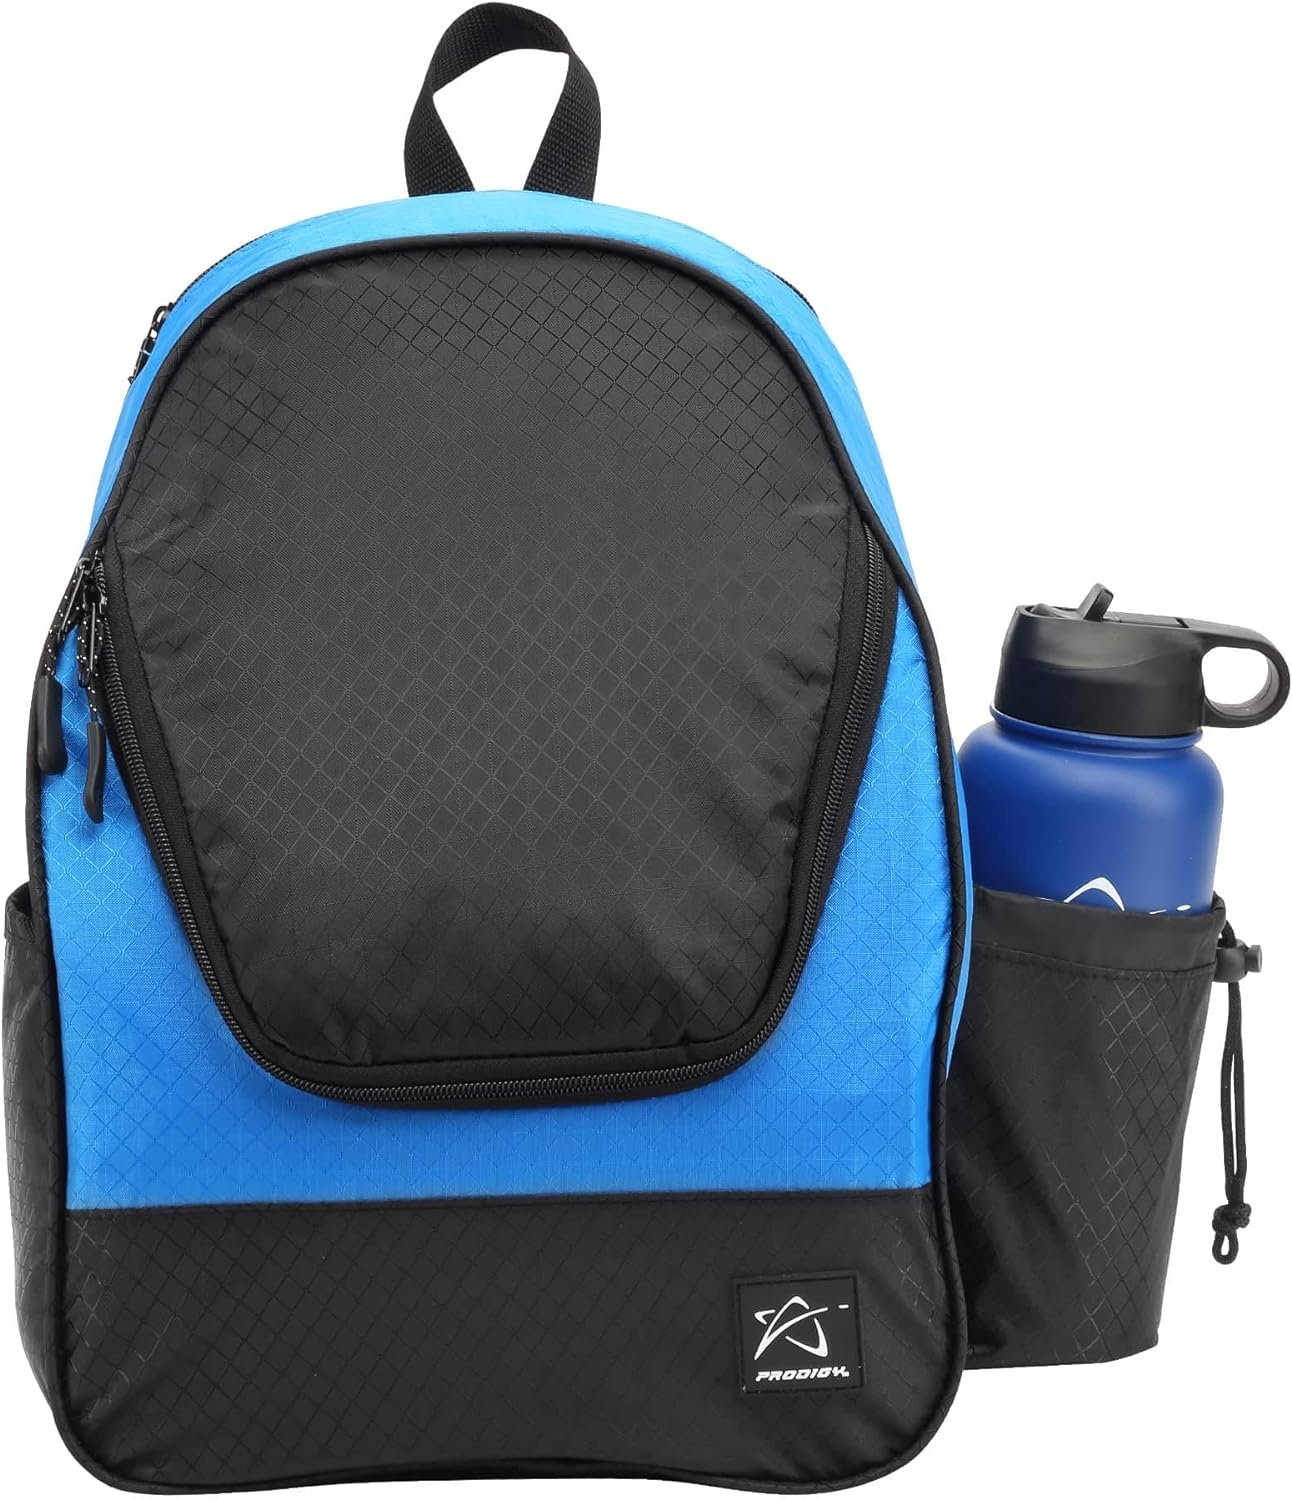 Prodigy Disc BP-4 Disc Golf Backpack | Frisbee Golf Bag with 16-18 Disc Capacity | Beginner Disc Golf Bag | Tear and Water Resistant | Disc Golf Bag Backpack for All Ages | Durable and Lightweight